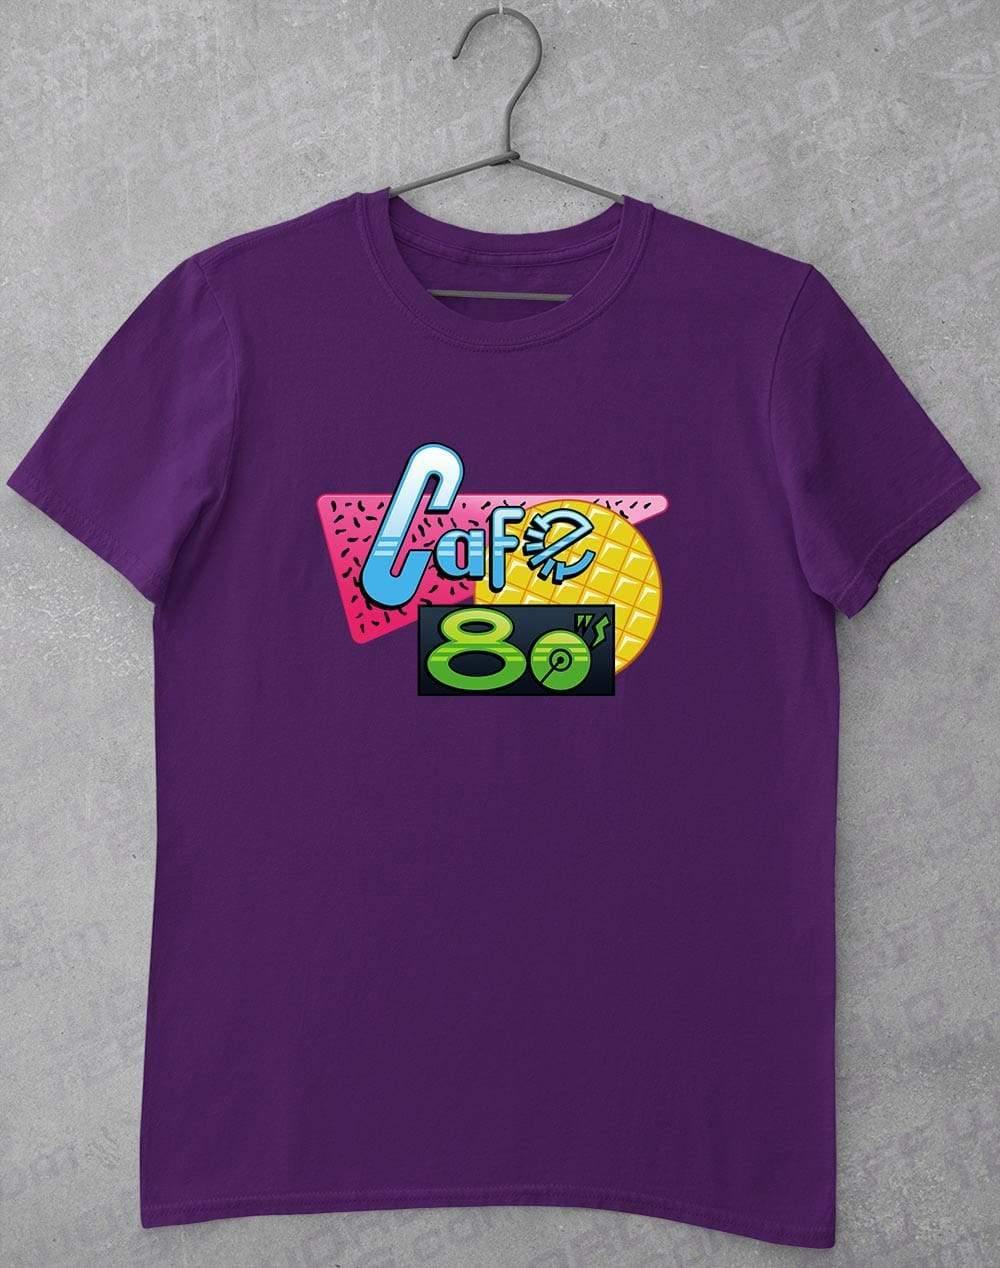 Cafe 80's T-Shirt S / Purple  - Off World Tees